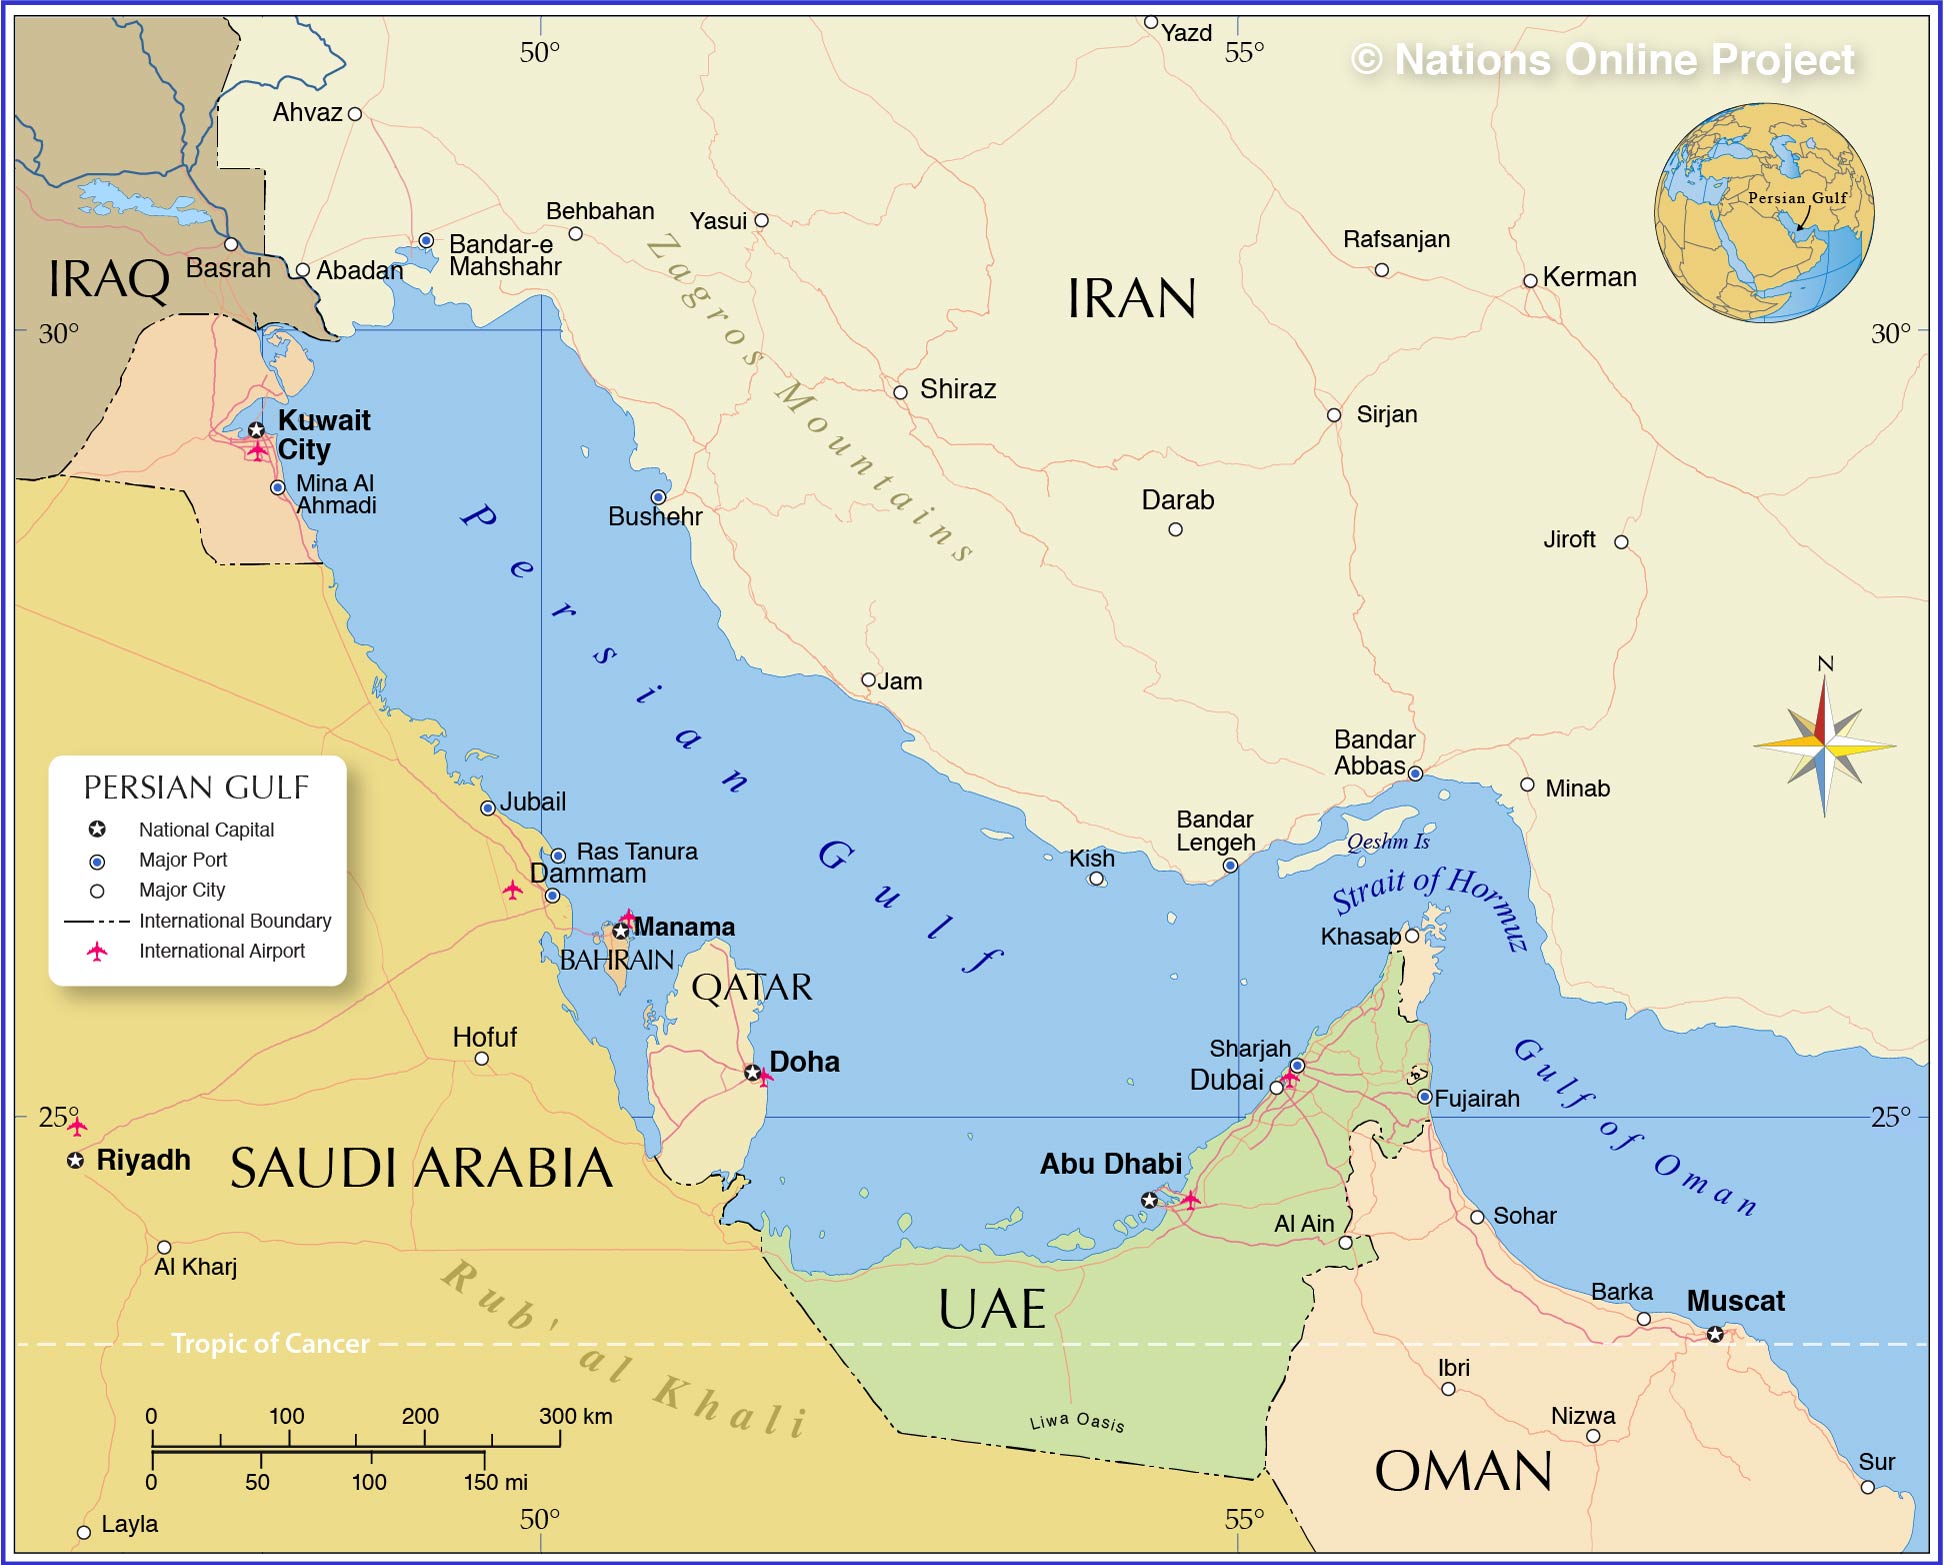 persian gulf on map Political Map Of Persian Gulf Nations Online Project persian gulf on map